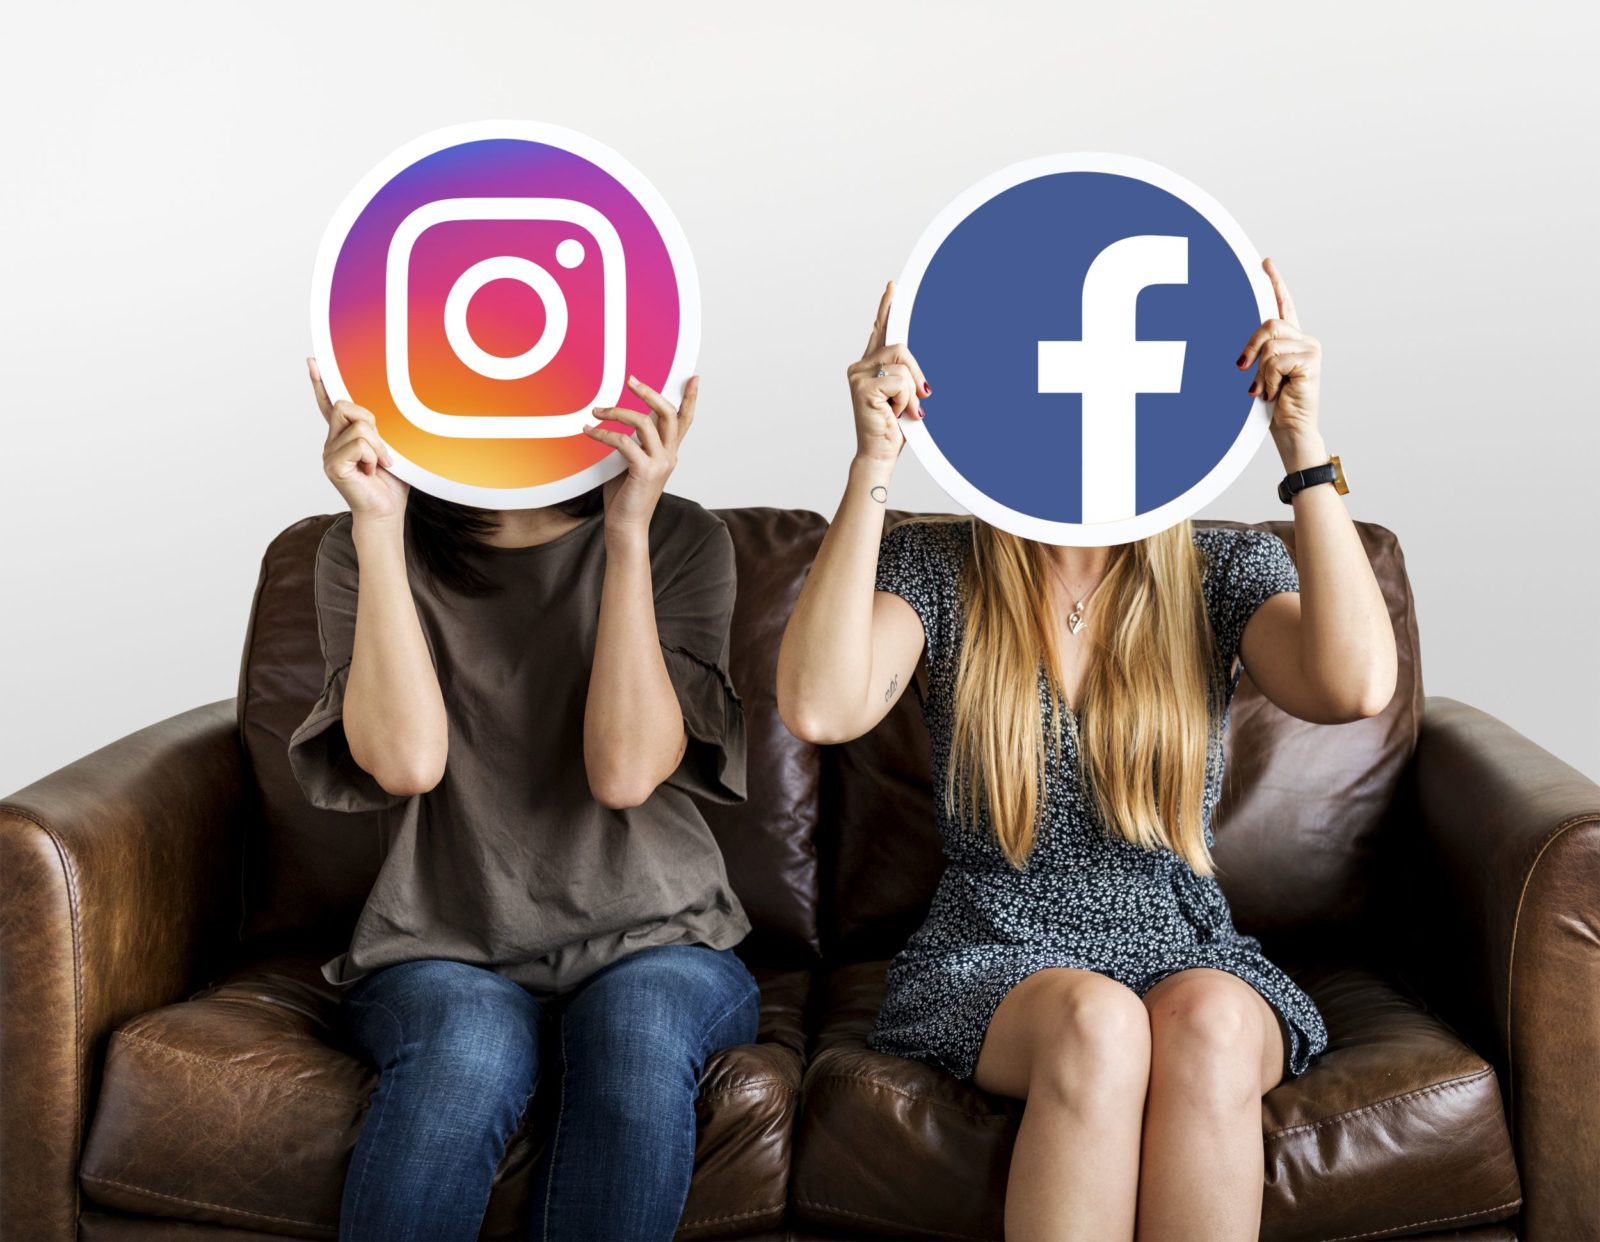 Social media evaluators holding Facebook and Instagram icons